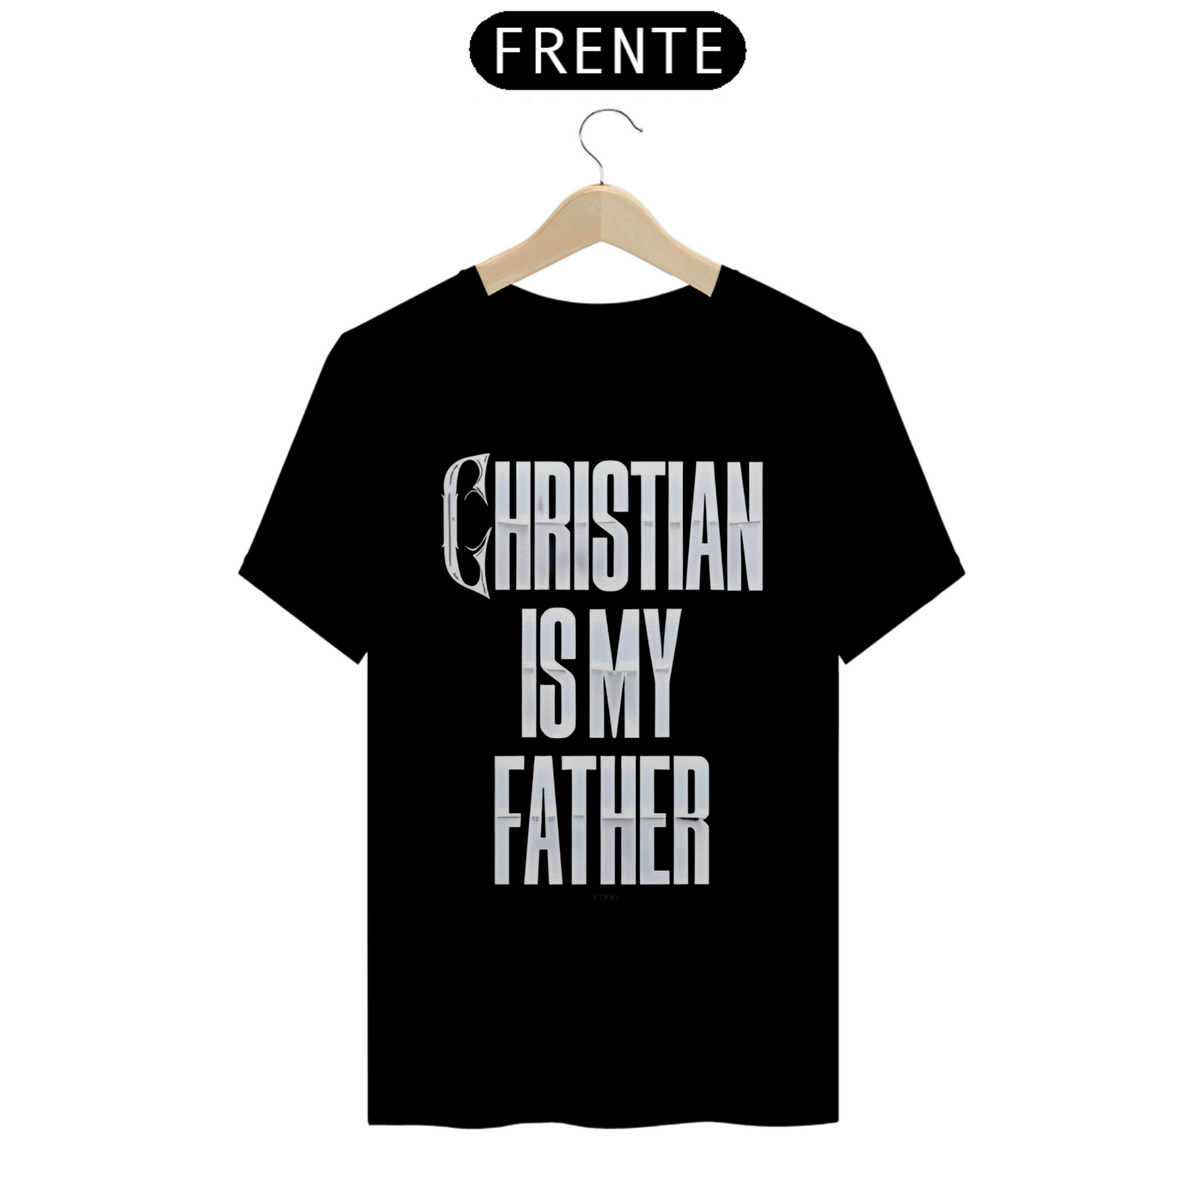 Nome do produto: Christian Cage - Father of the Year